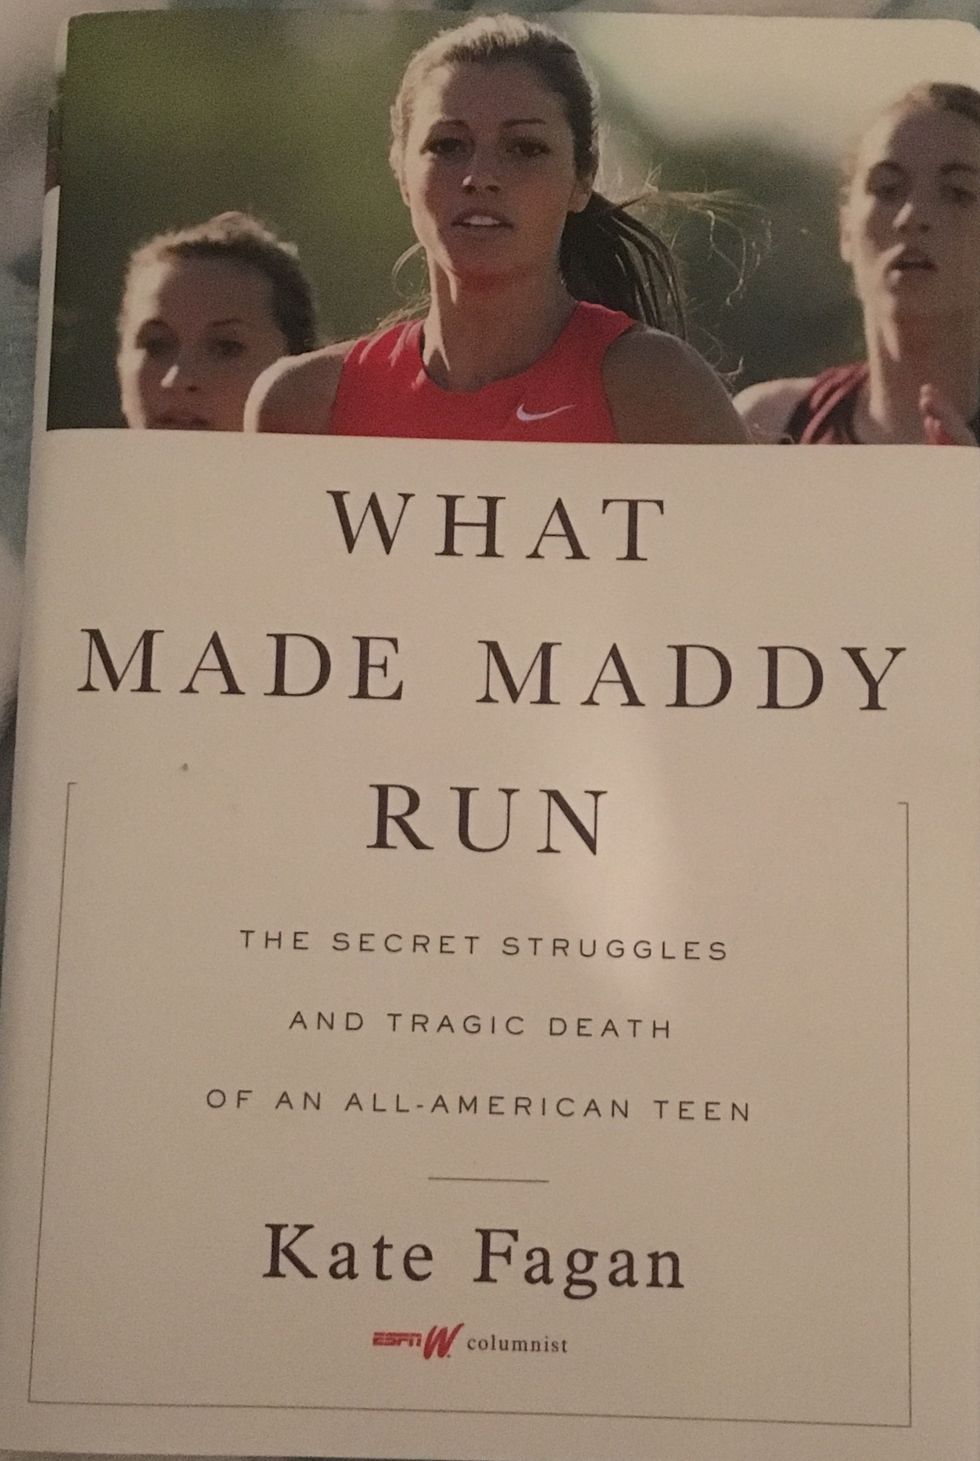 The Power Behind A Story: What Made Maddy Run